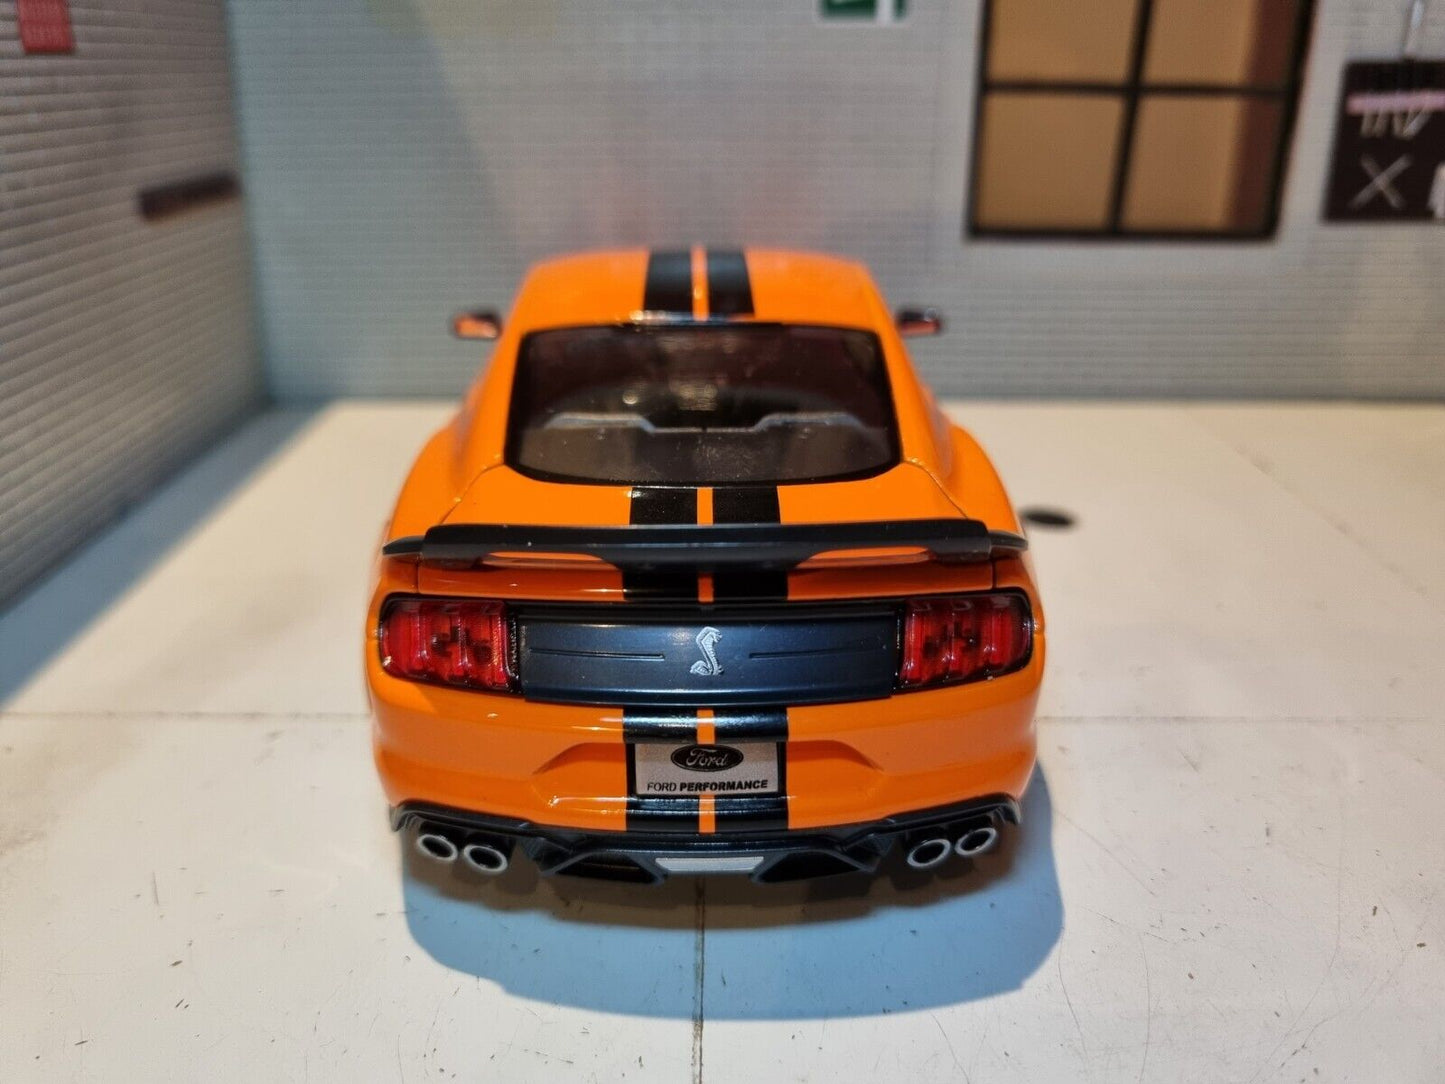 Ford 2020 Mustang Shelby GT500 31532 Maisto 1:24